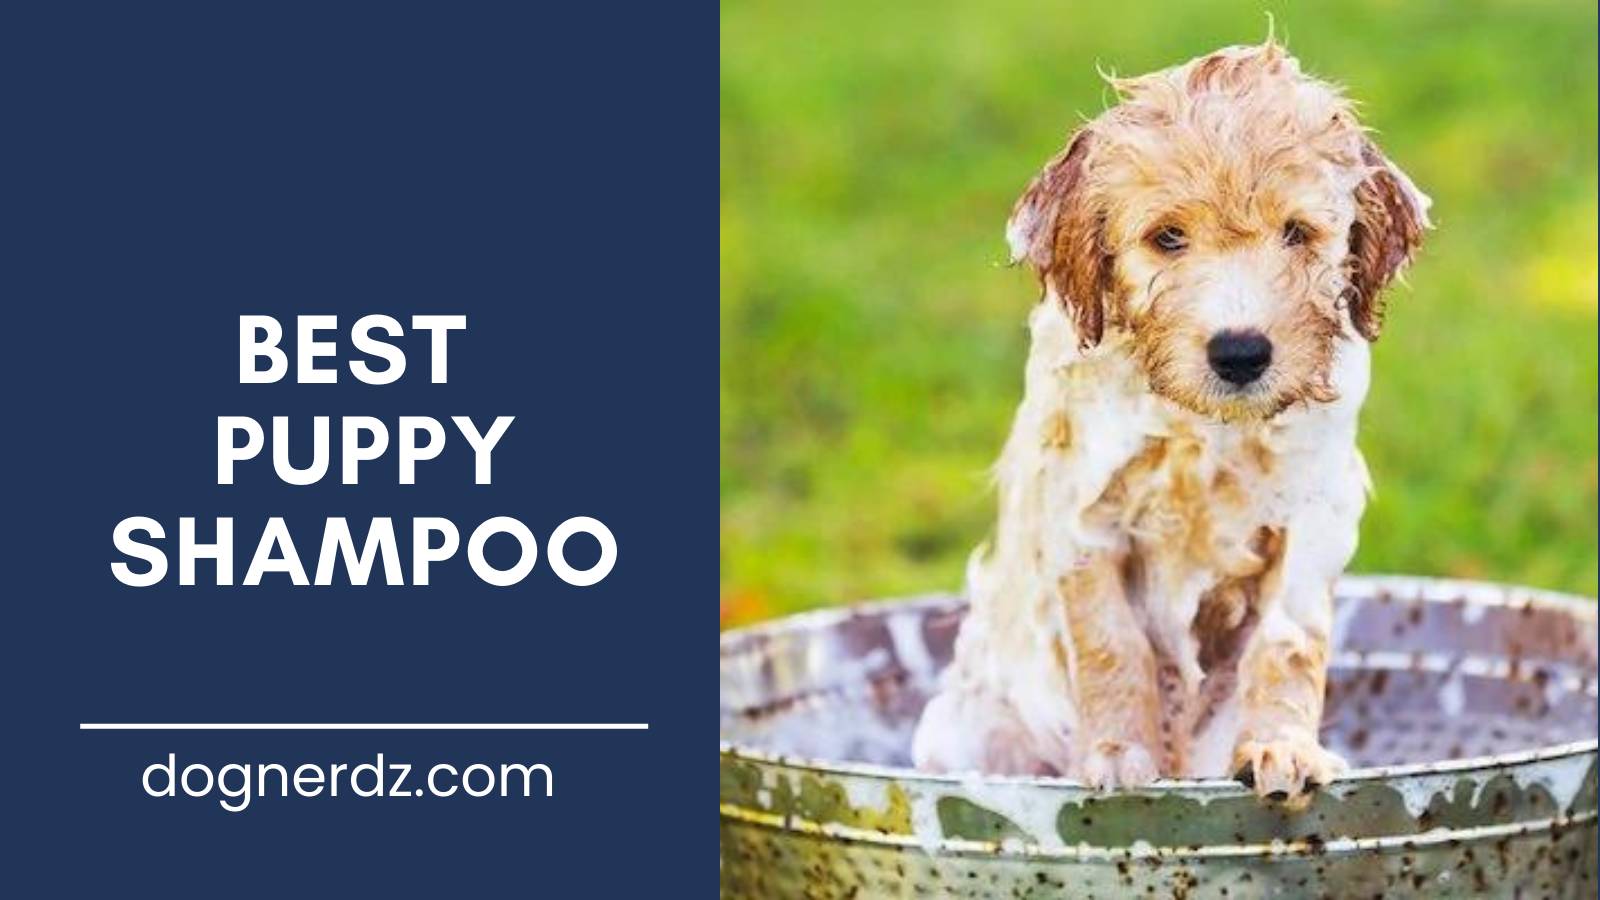 review of the best puppy shampoo